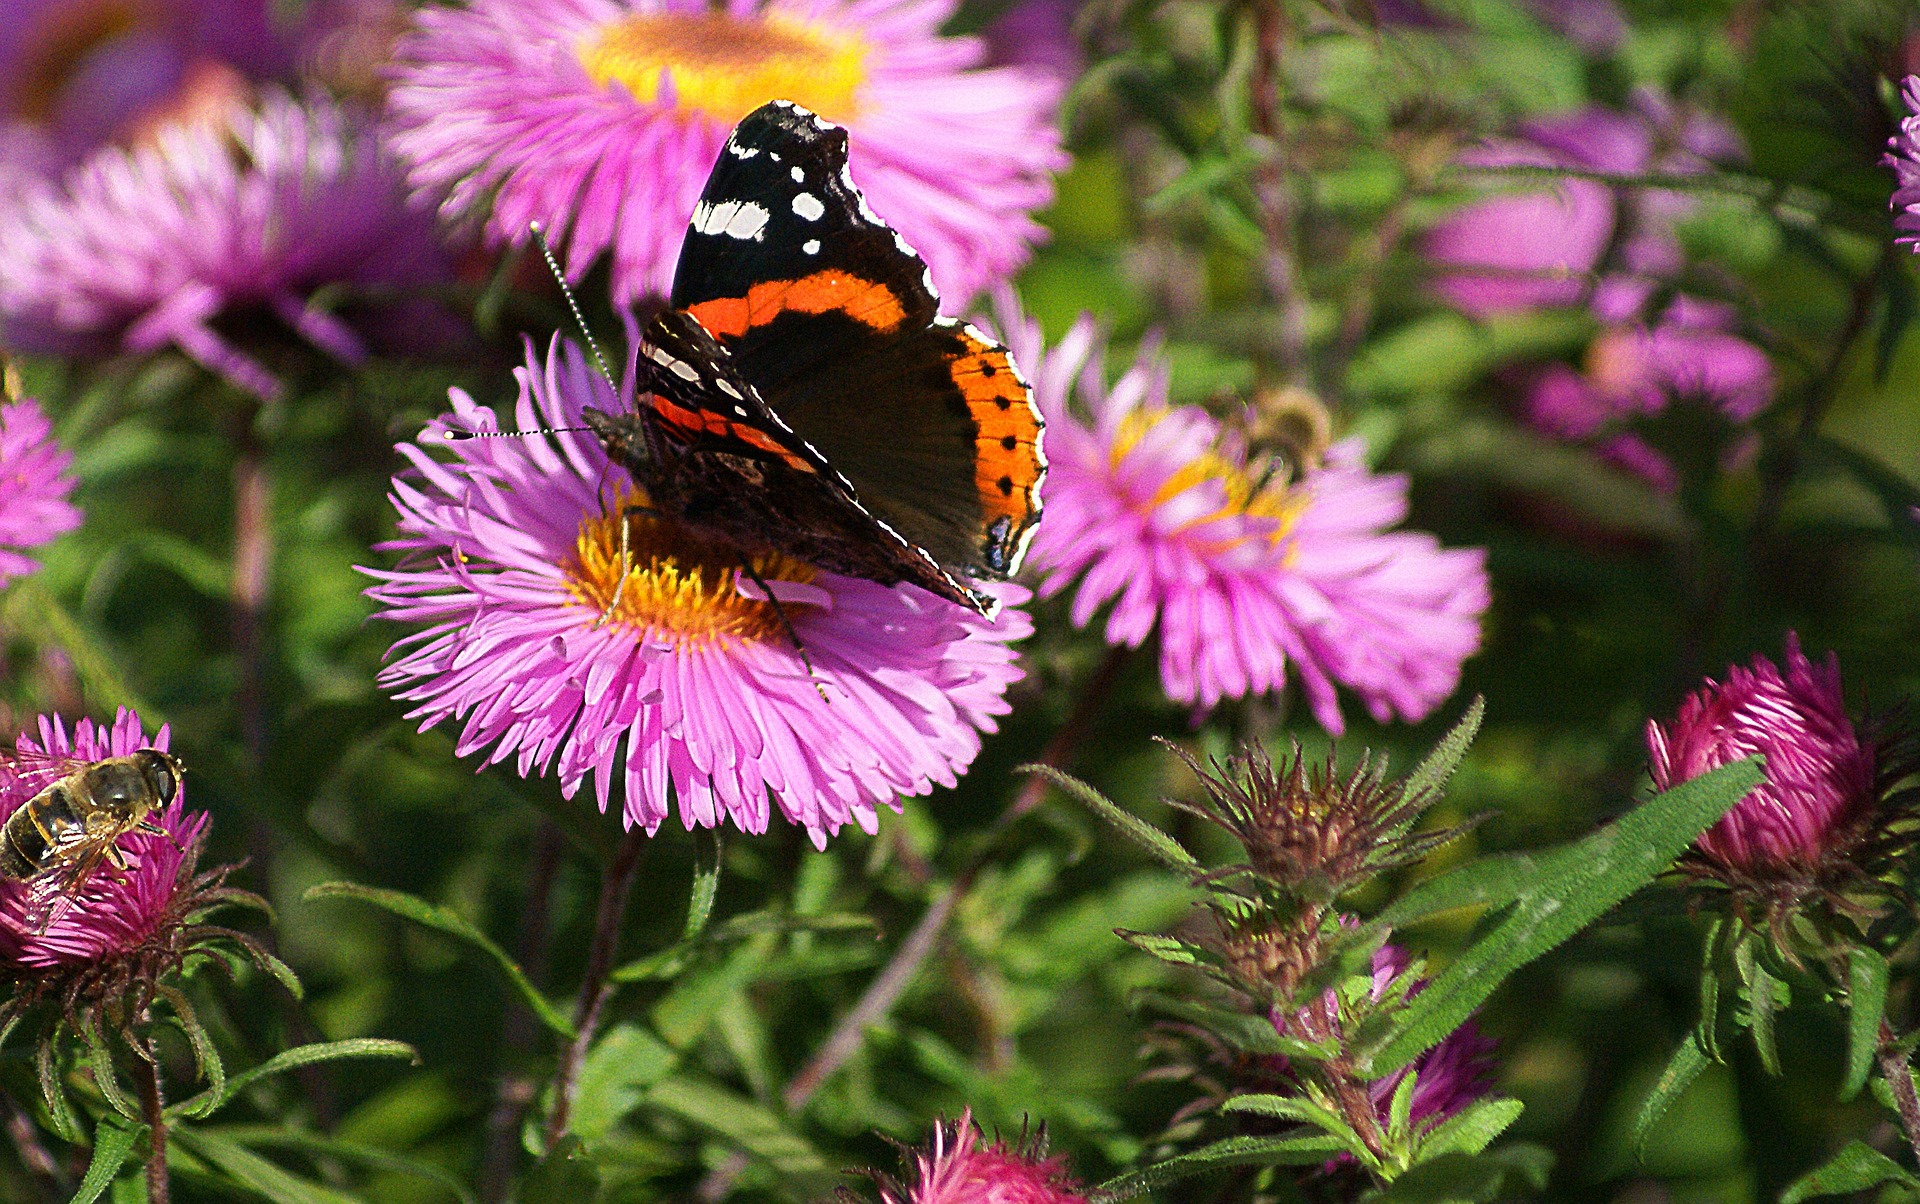 Butterfies and Bees in the Garden